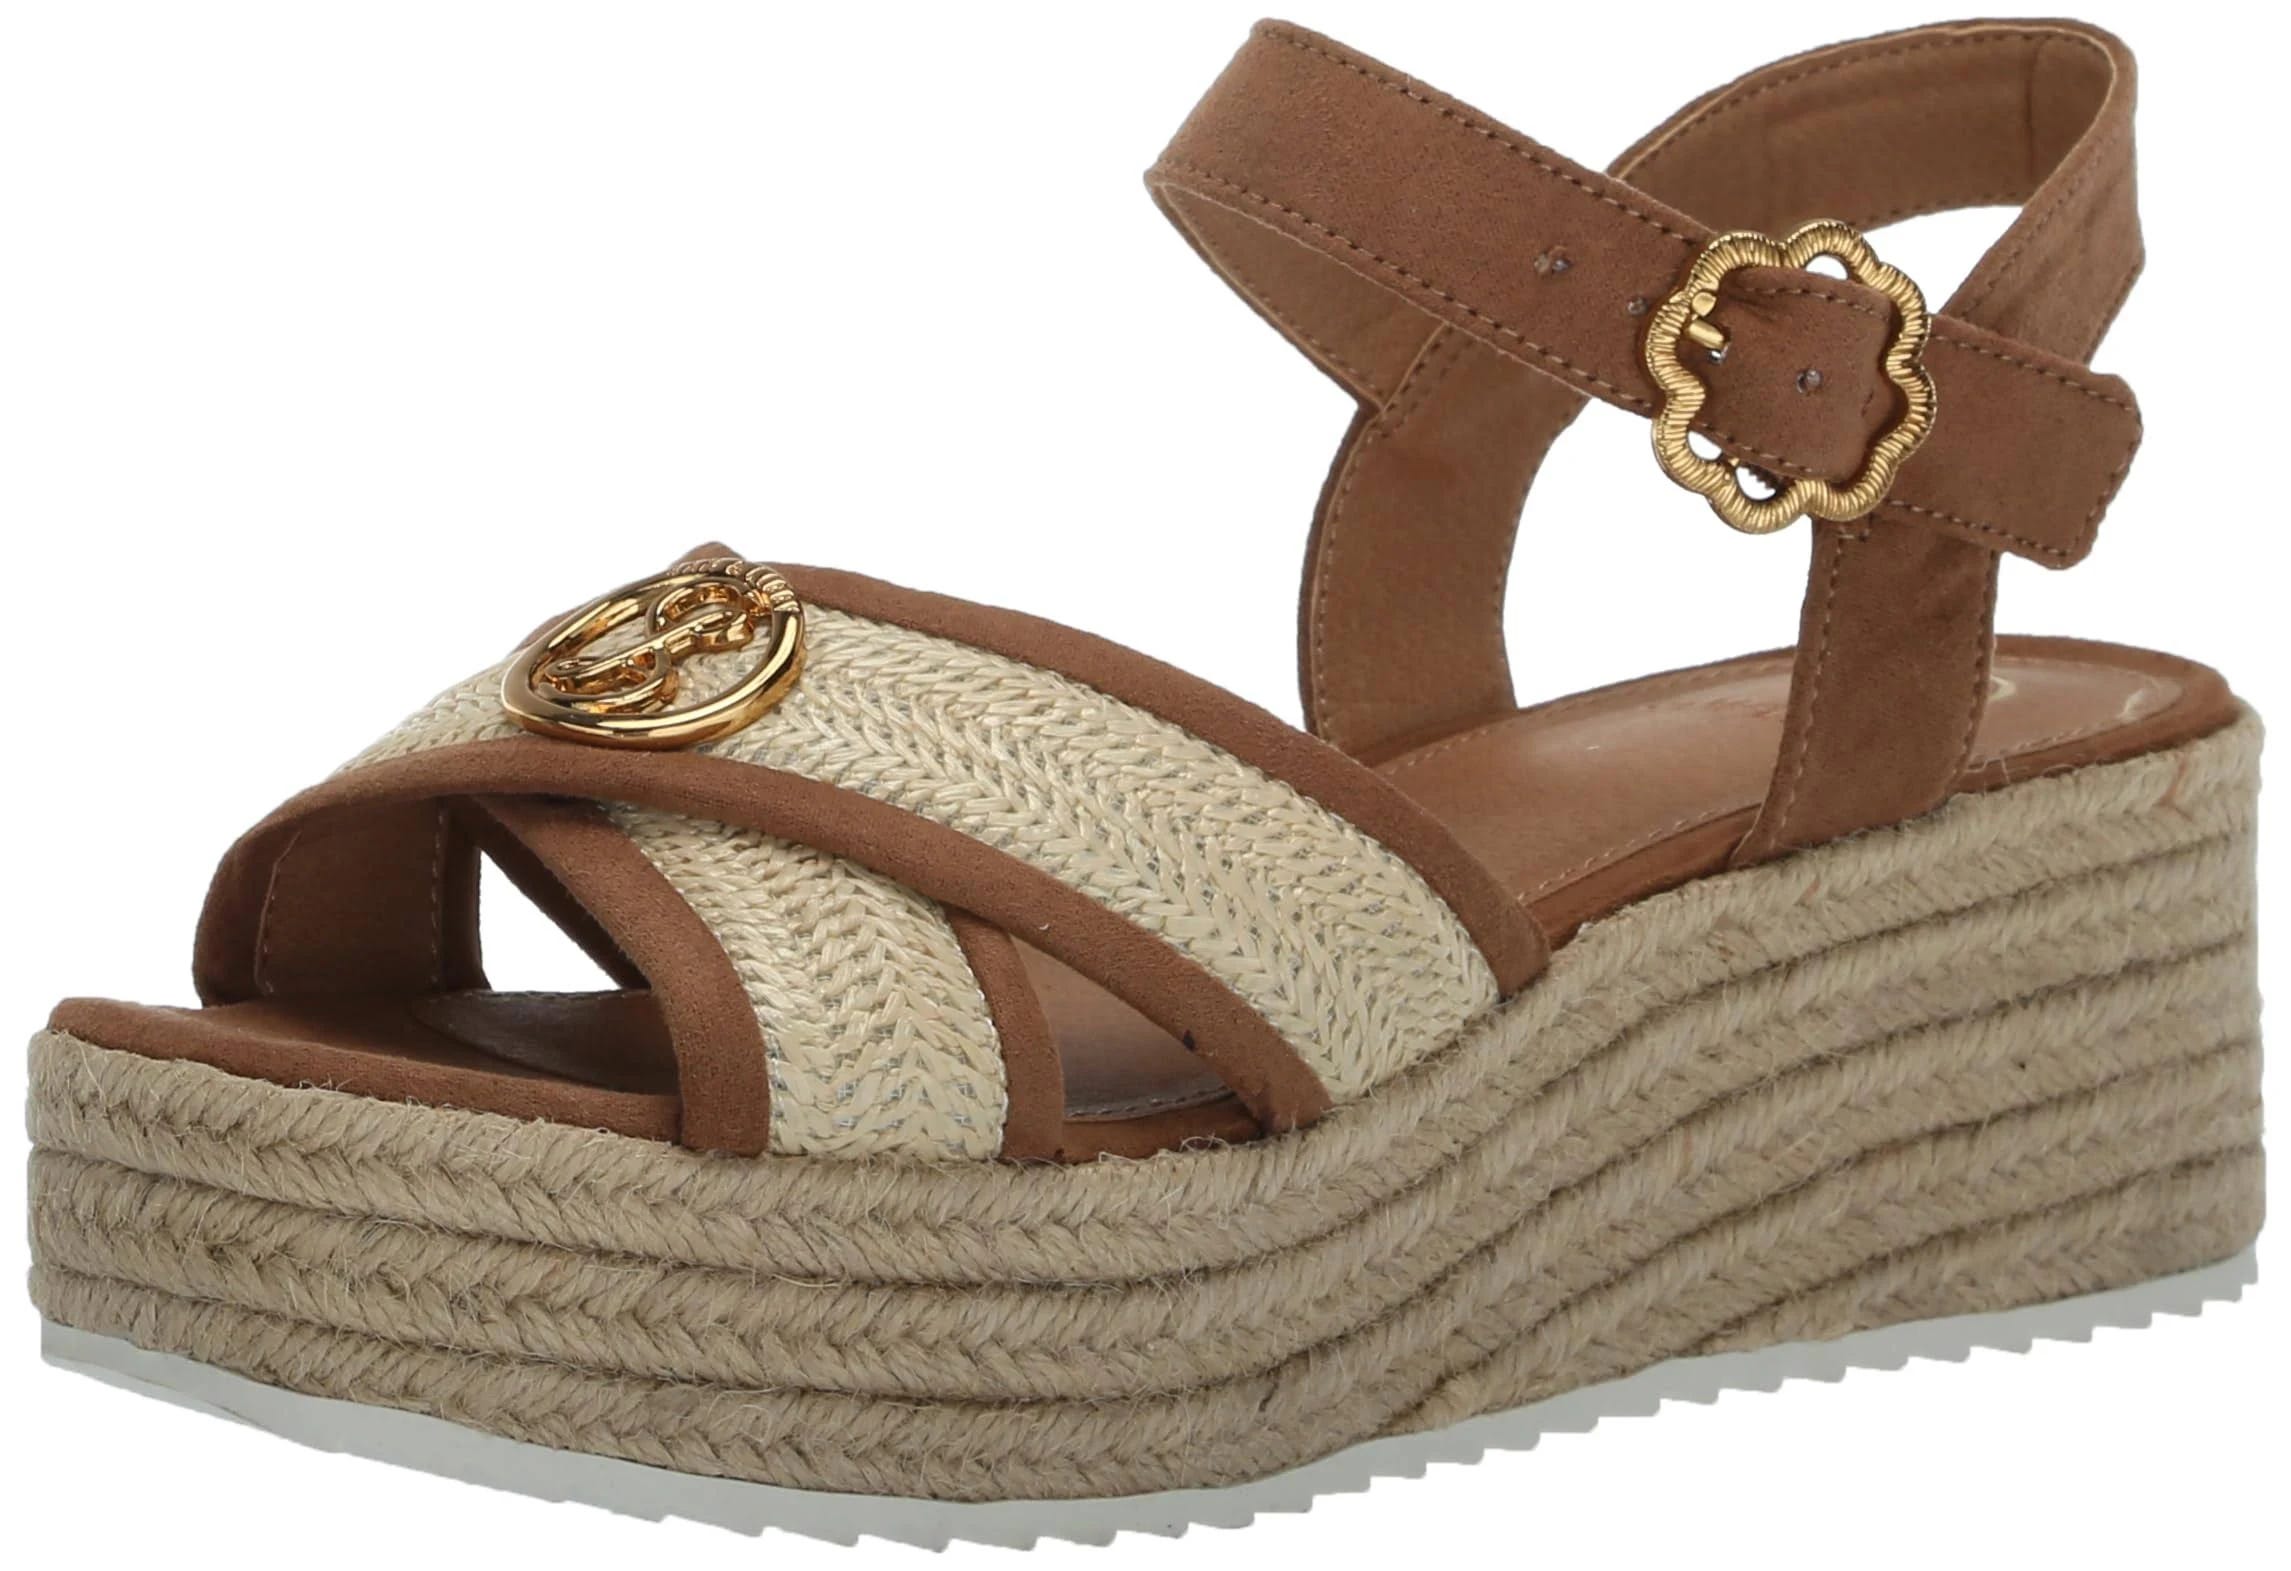 Affordable Sam and Libby Corrinne Wedge Sandals in Natural Size 10 | Image